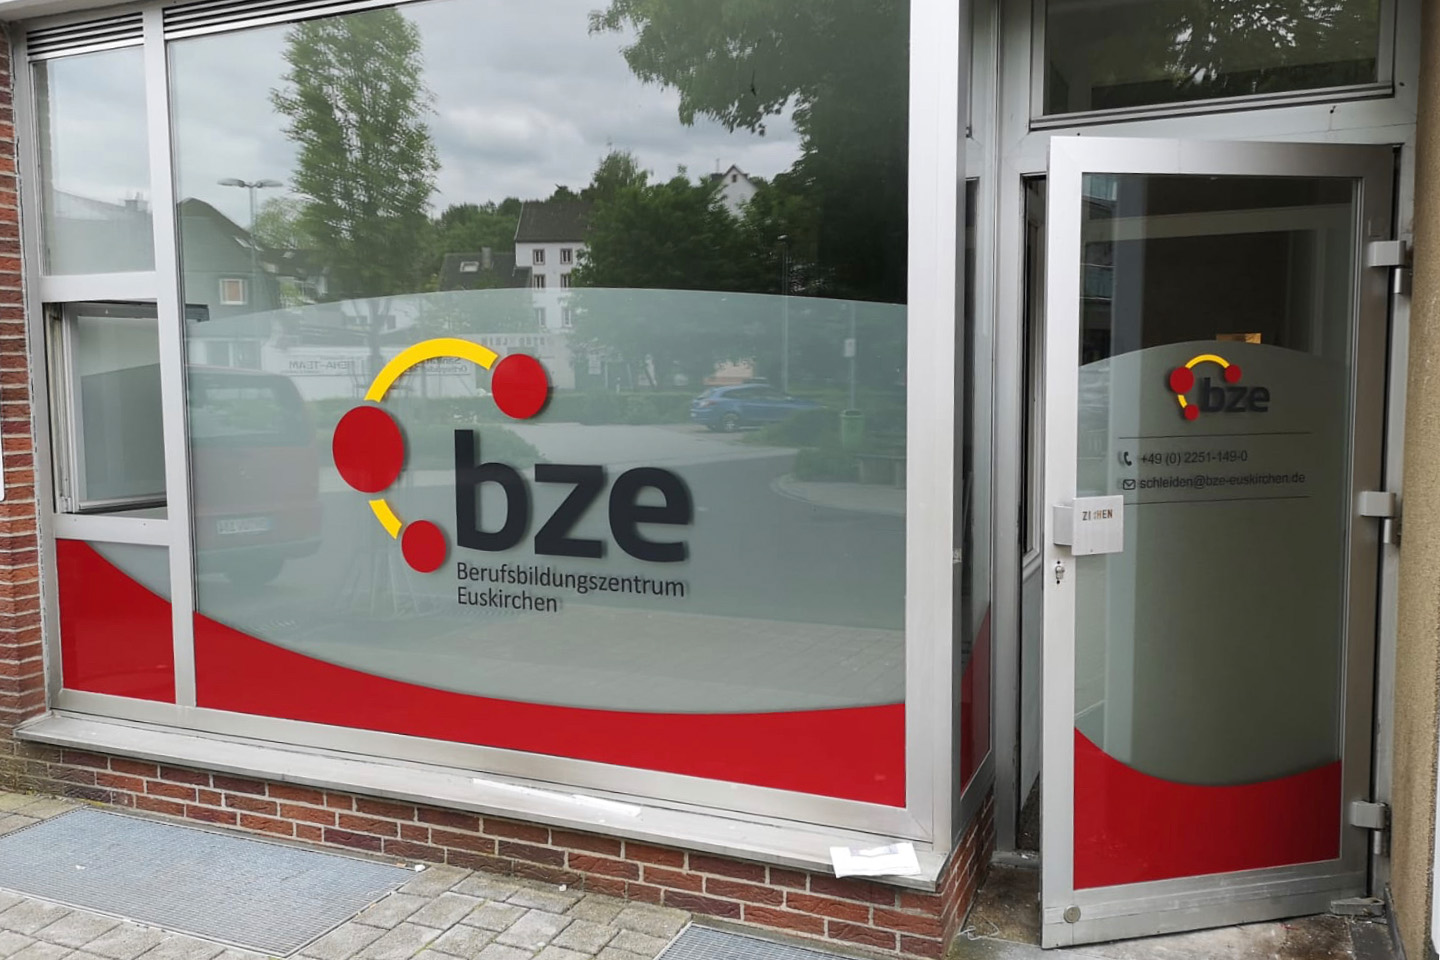 Bze : VP-BZE | VPBZE | Latest Photos | Planespotters.net - The organization produces independent economic and public policy research on the transition of advanced economies to a zero emissions model.